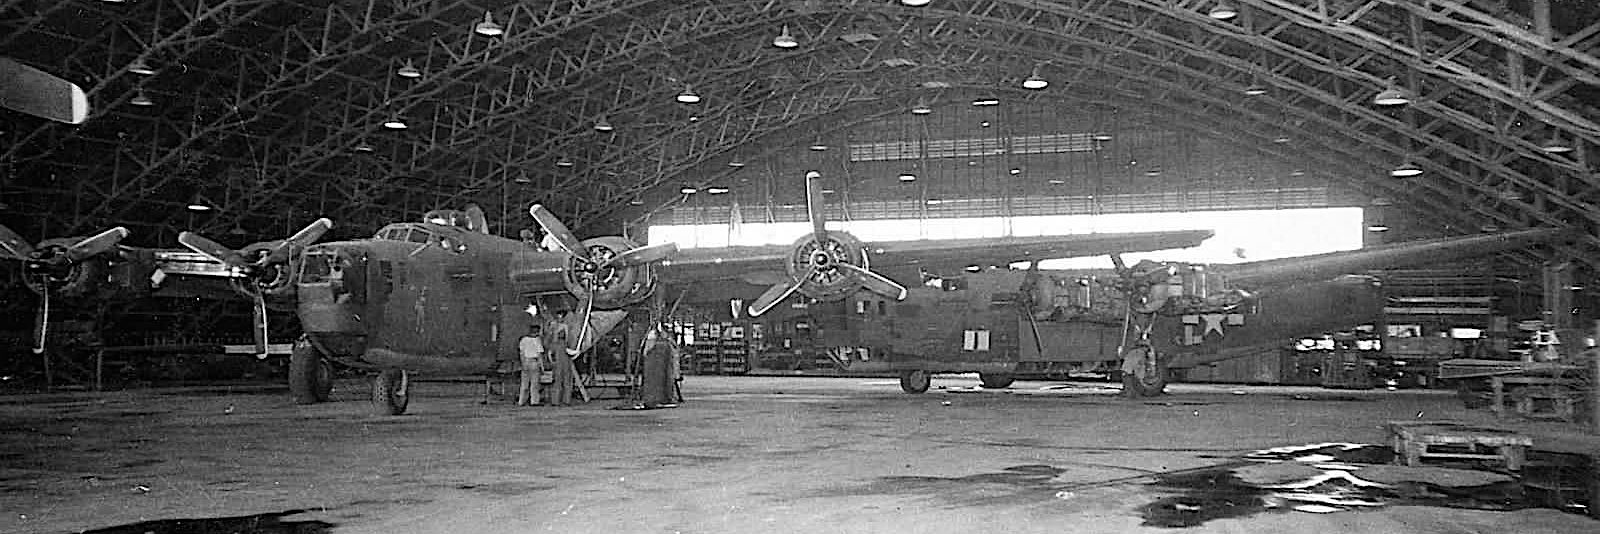 B-24 aircraft in hangars at Townsville, Feb 1944